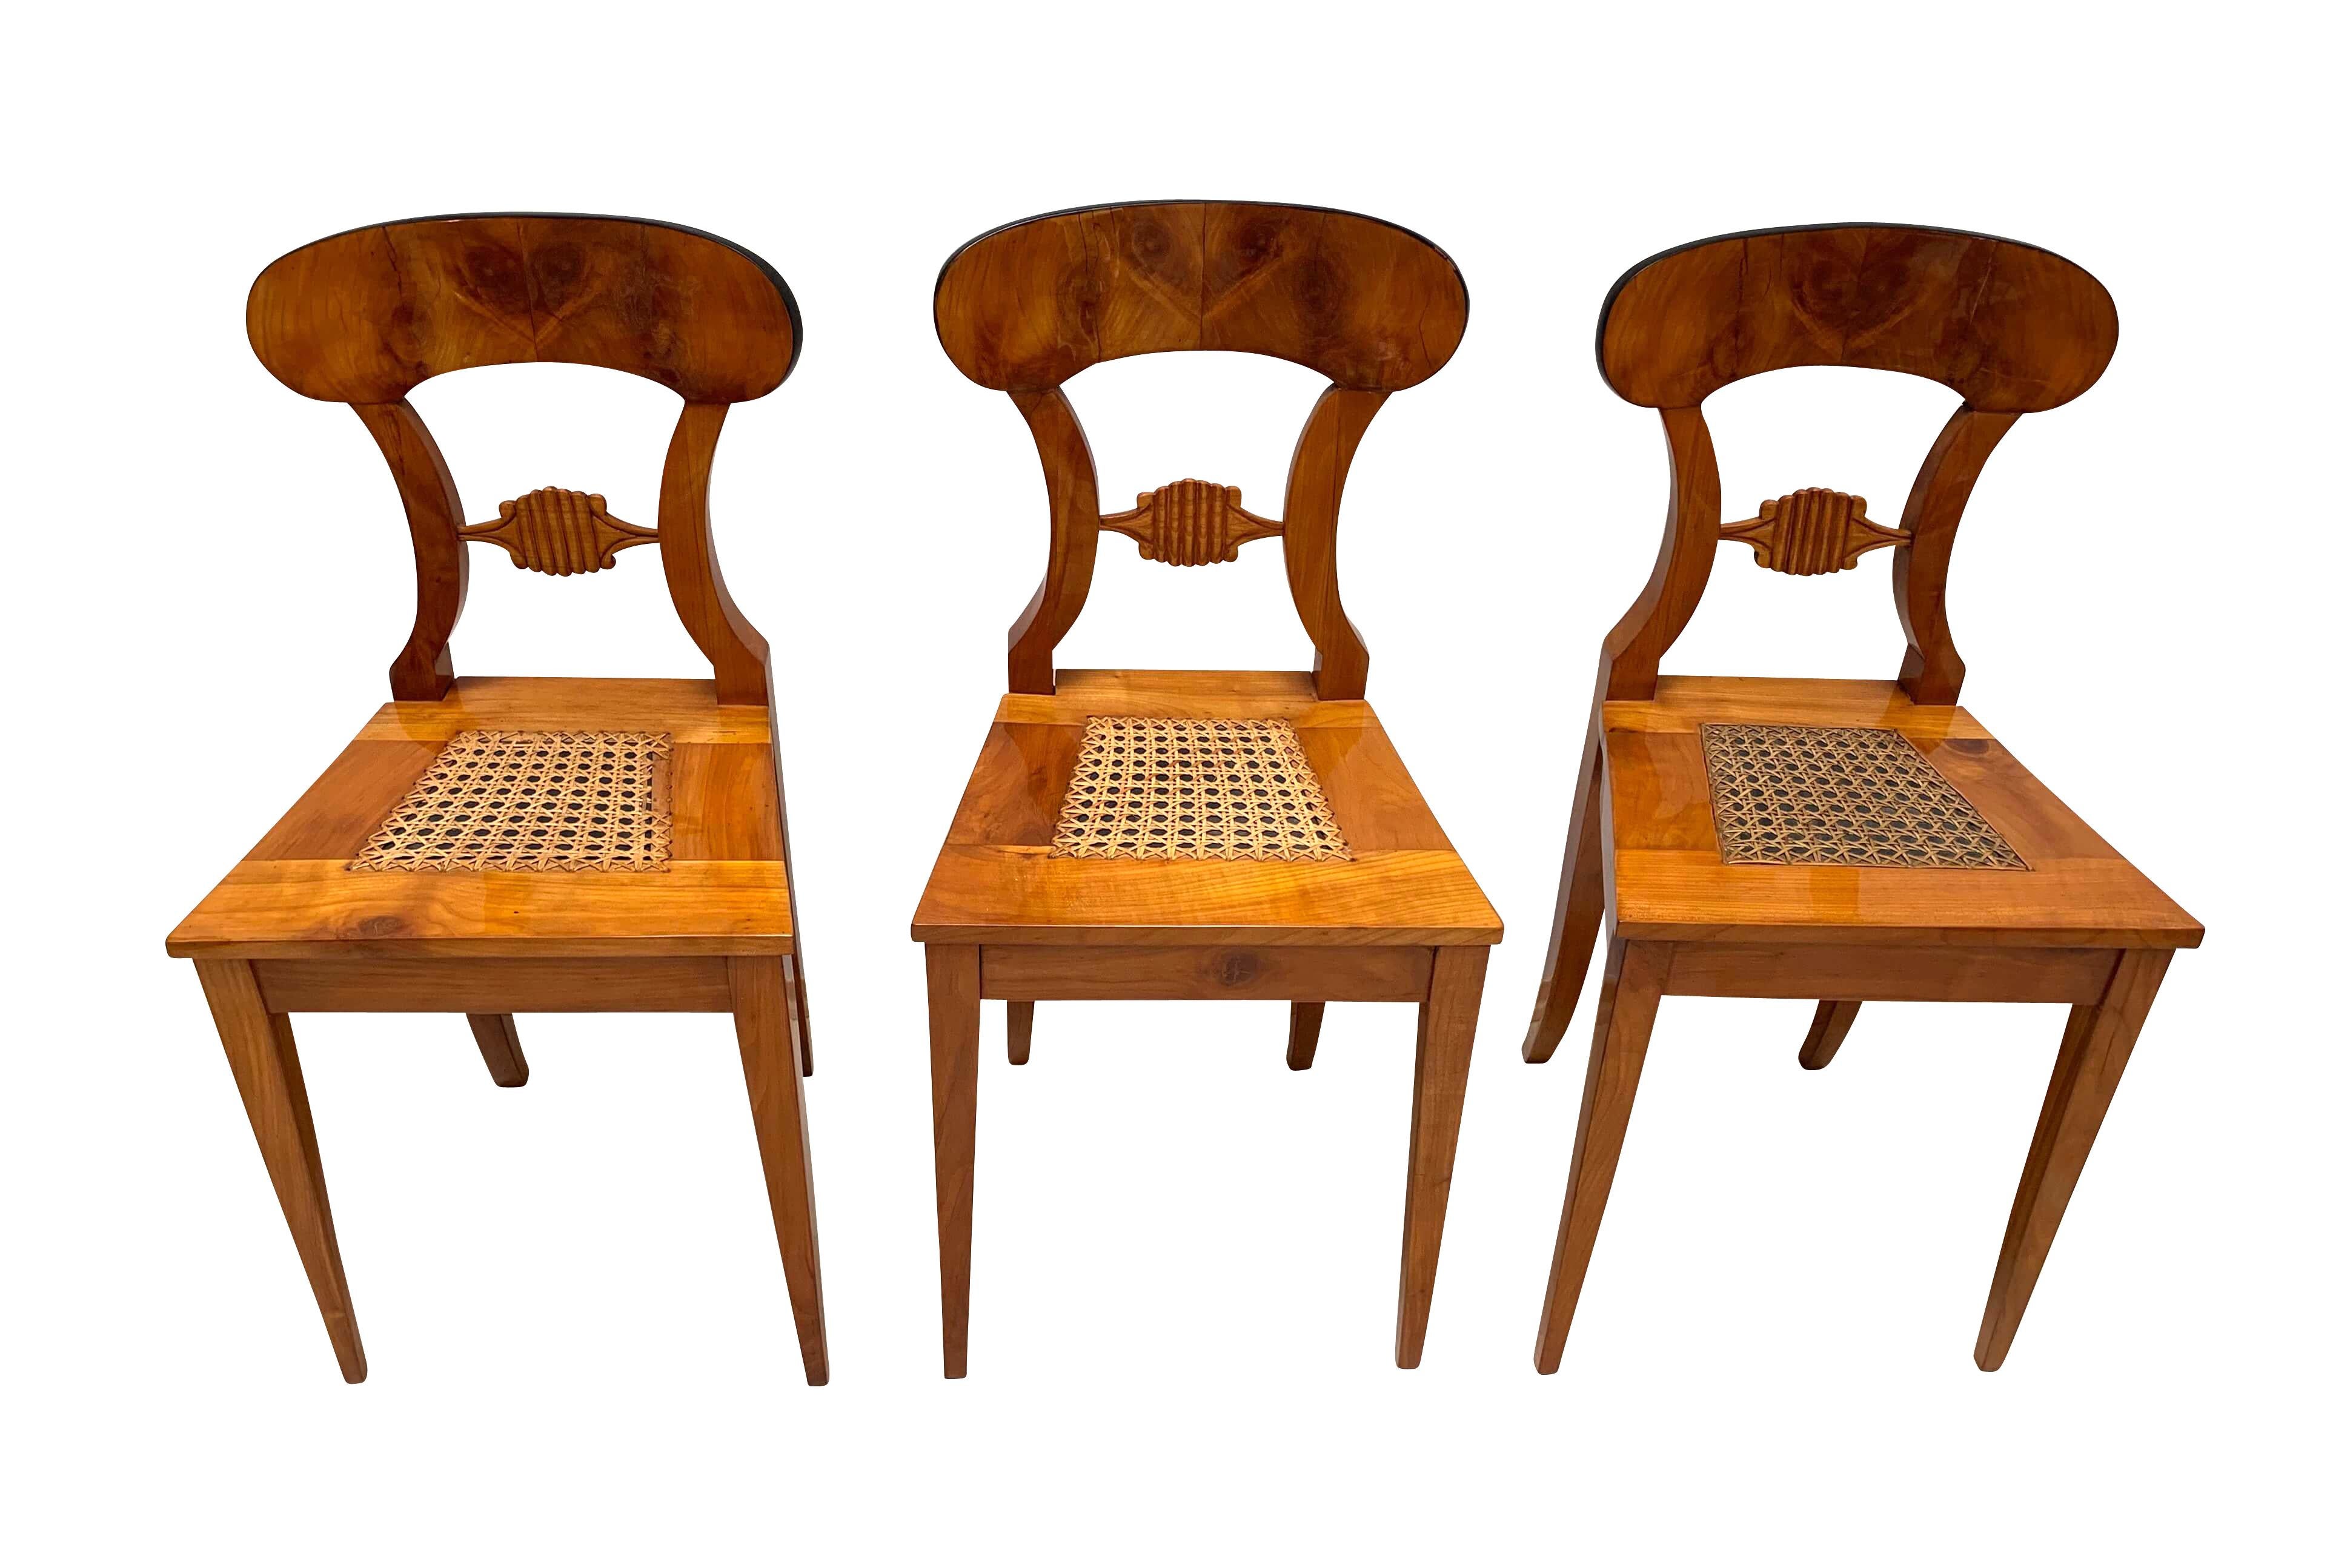 Mid-19th Century Set of Six Biedermeier Board Chairs, Cherry Wood and Mesh, Vienna, circa 1830 For Sale